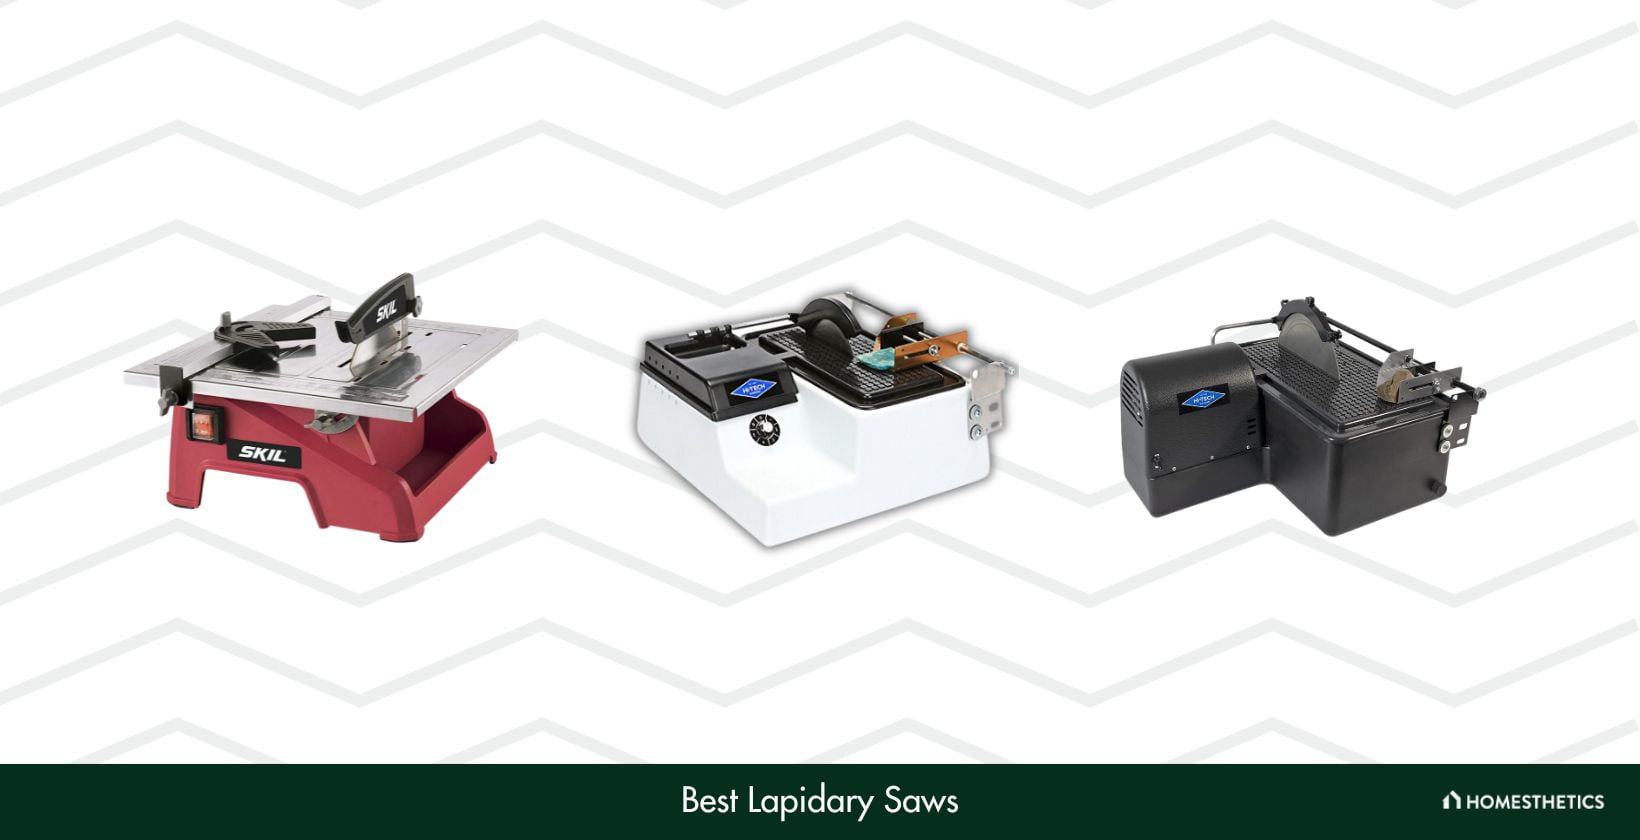 Best Lapidary Saws